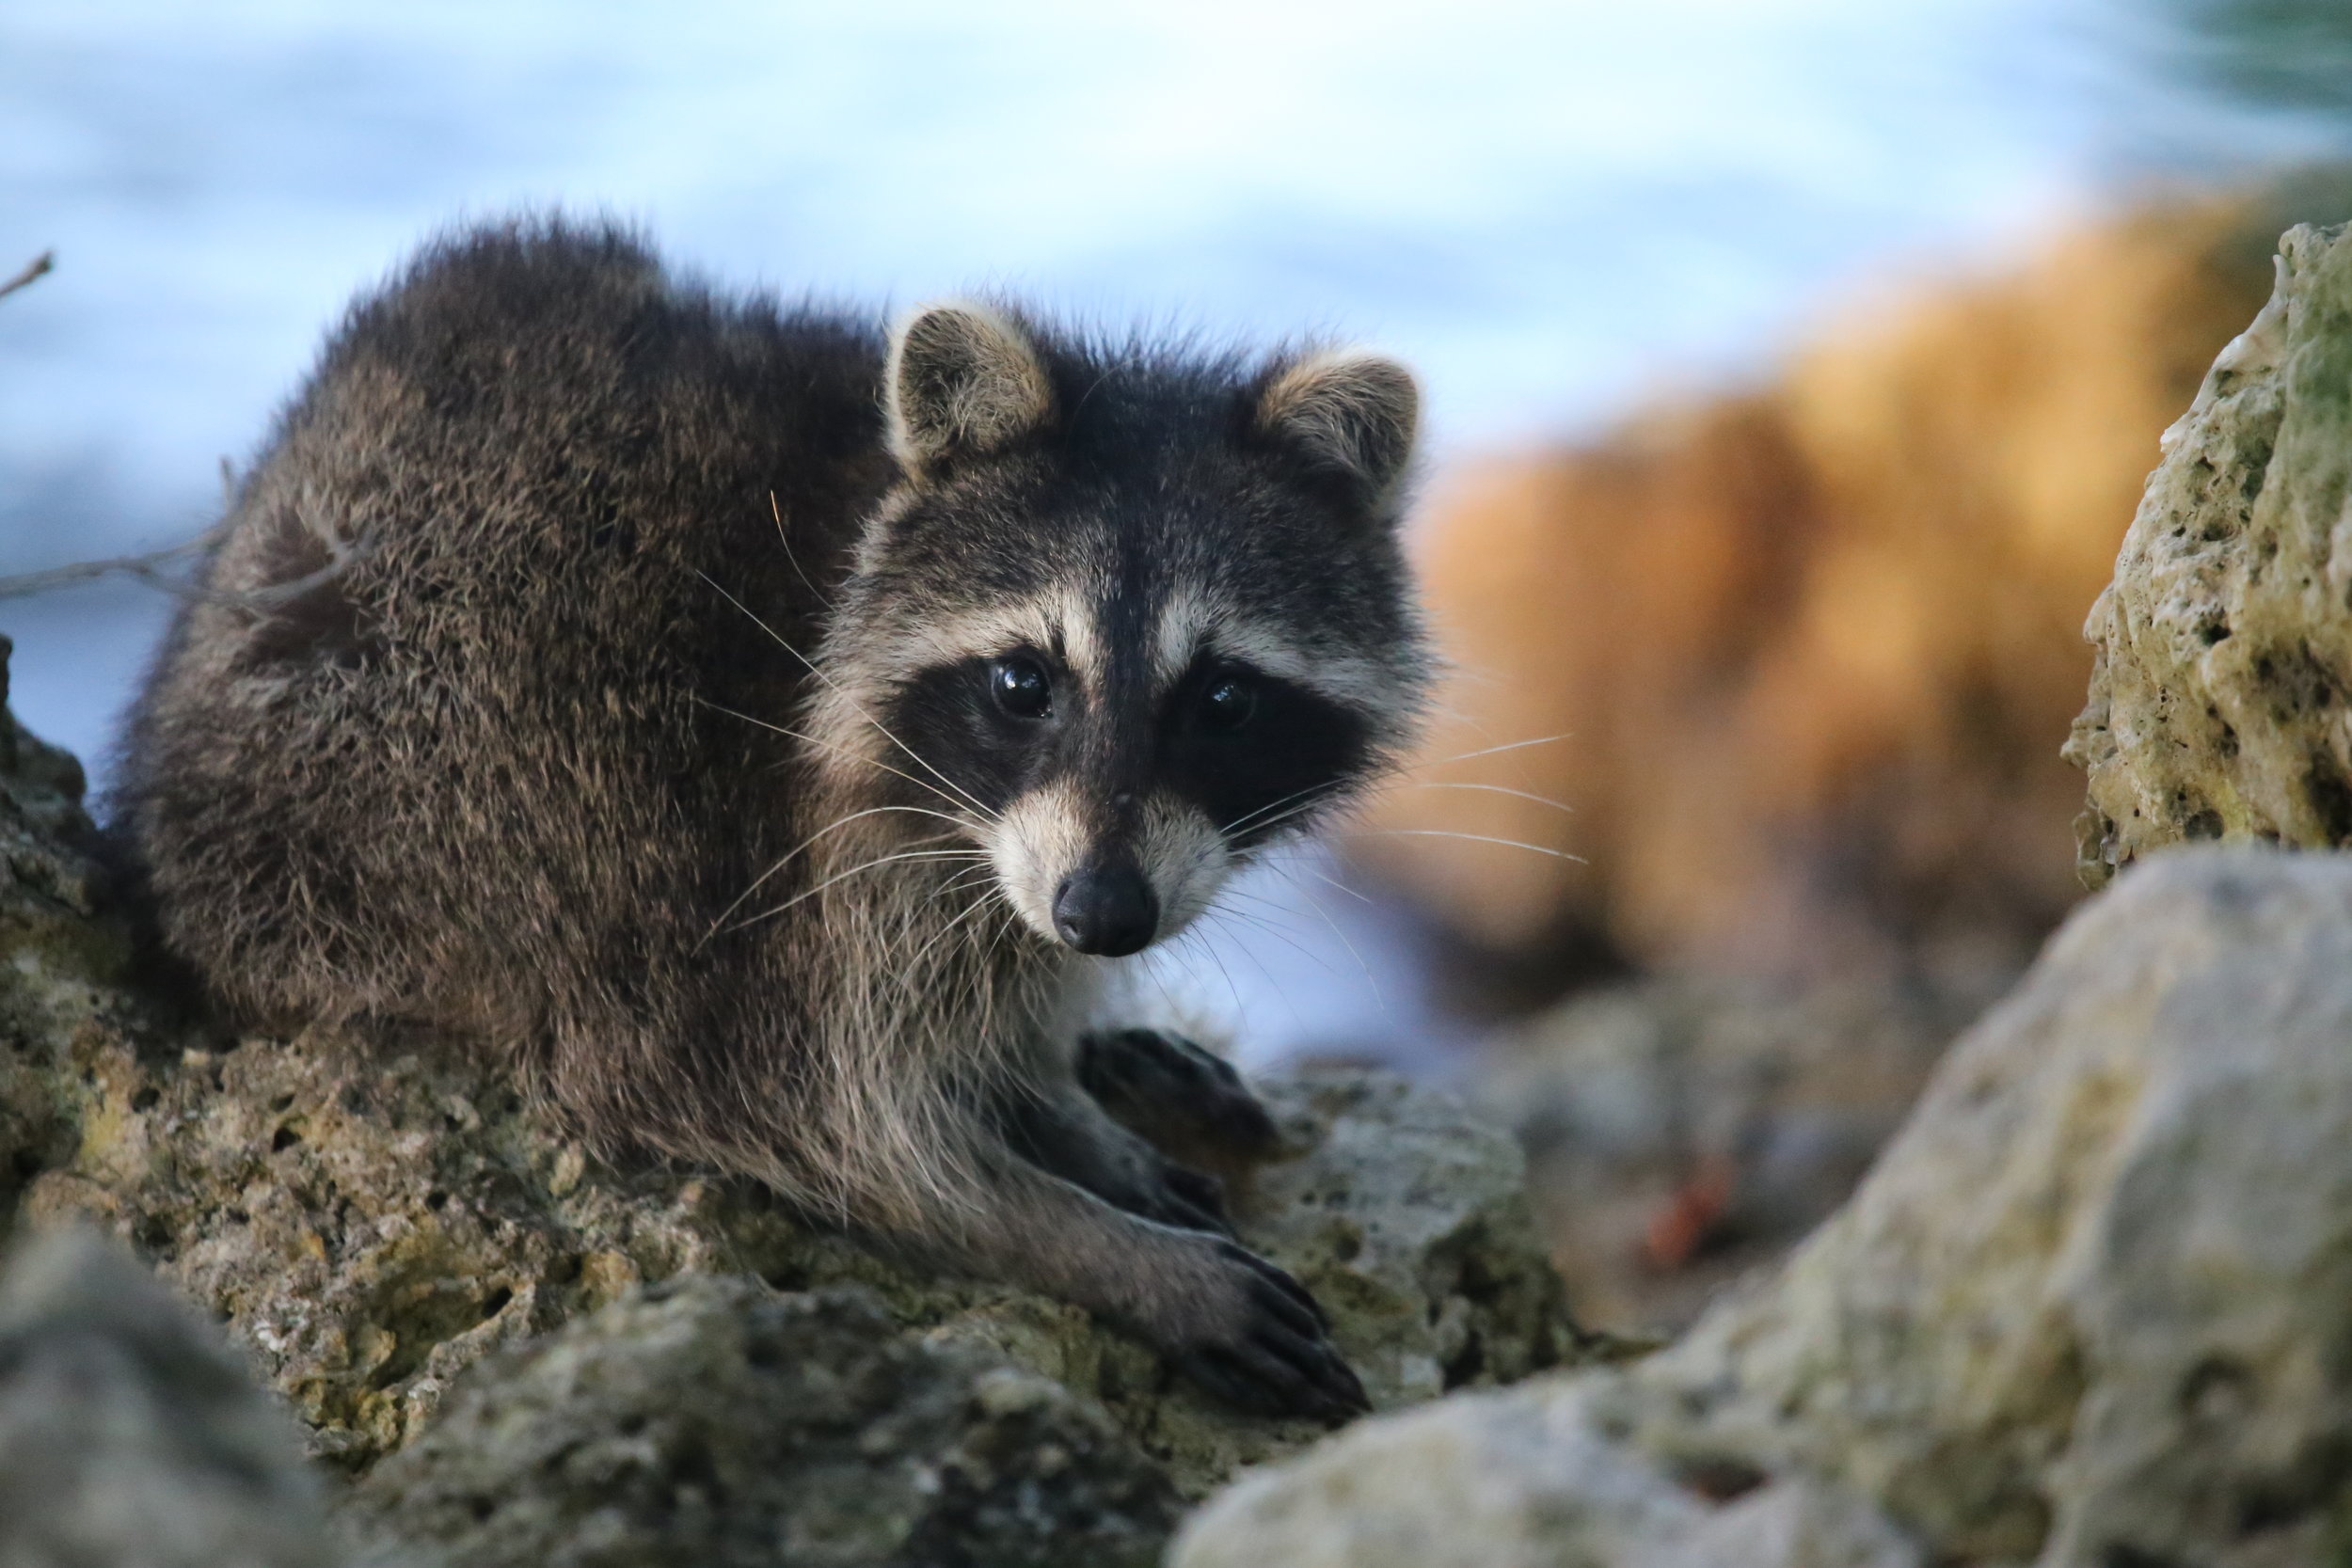   A small racoon looks innocently at the camera. Photo by cuatrok77  